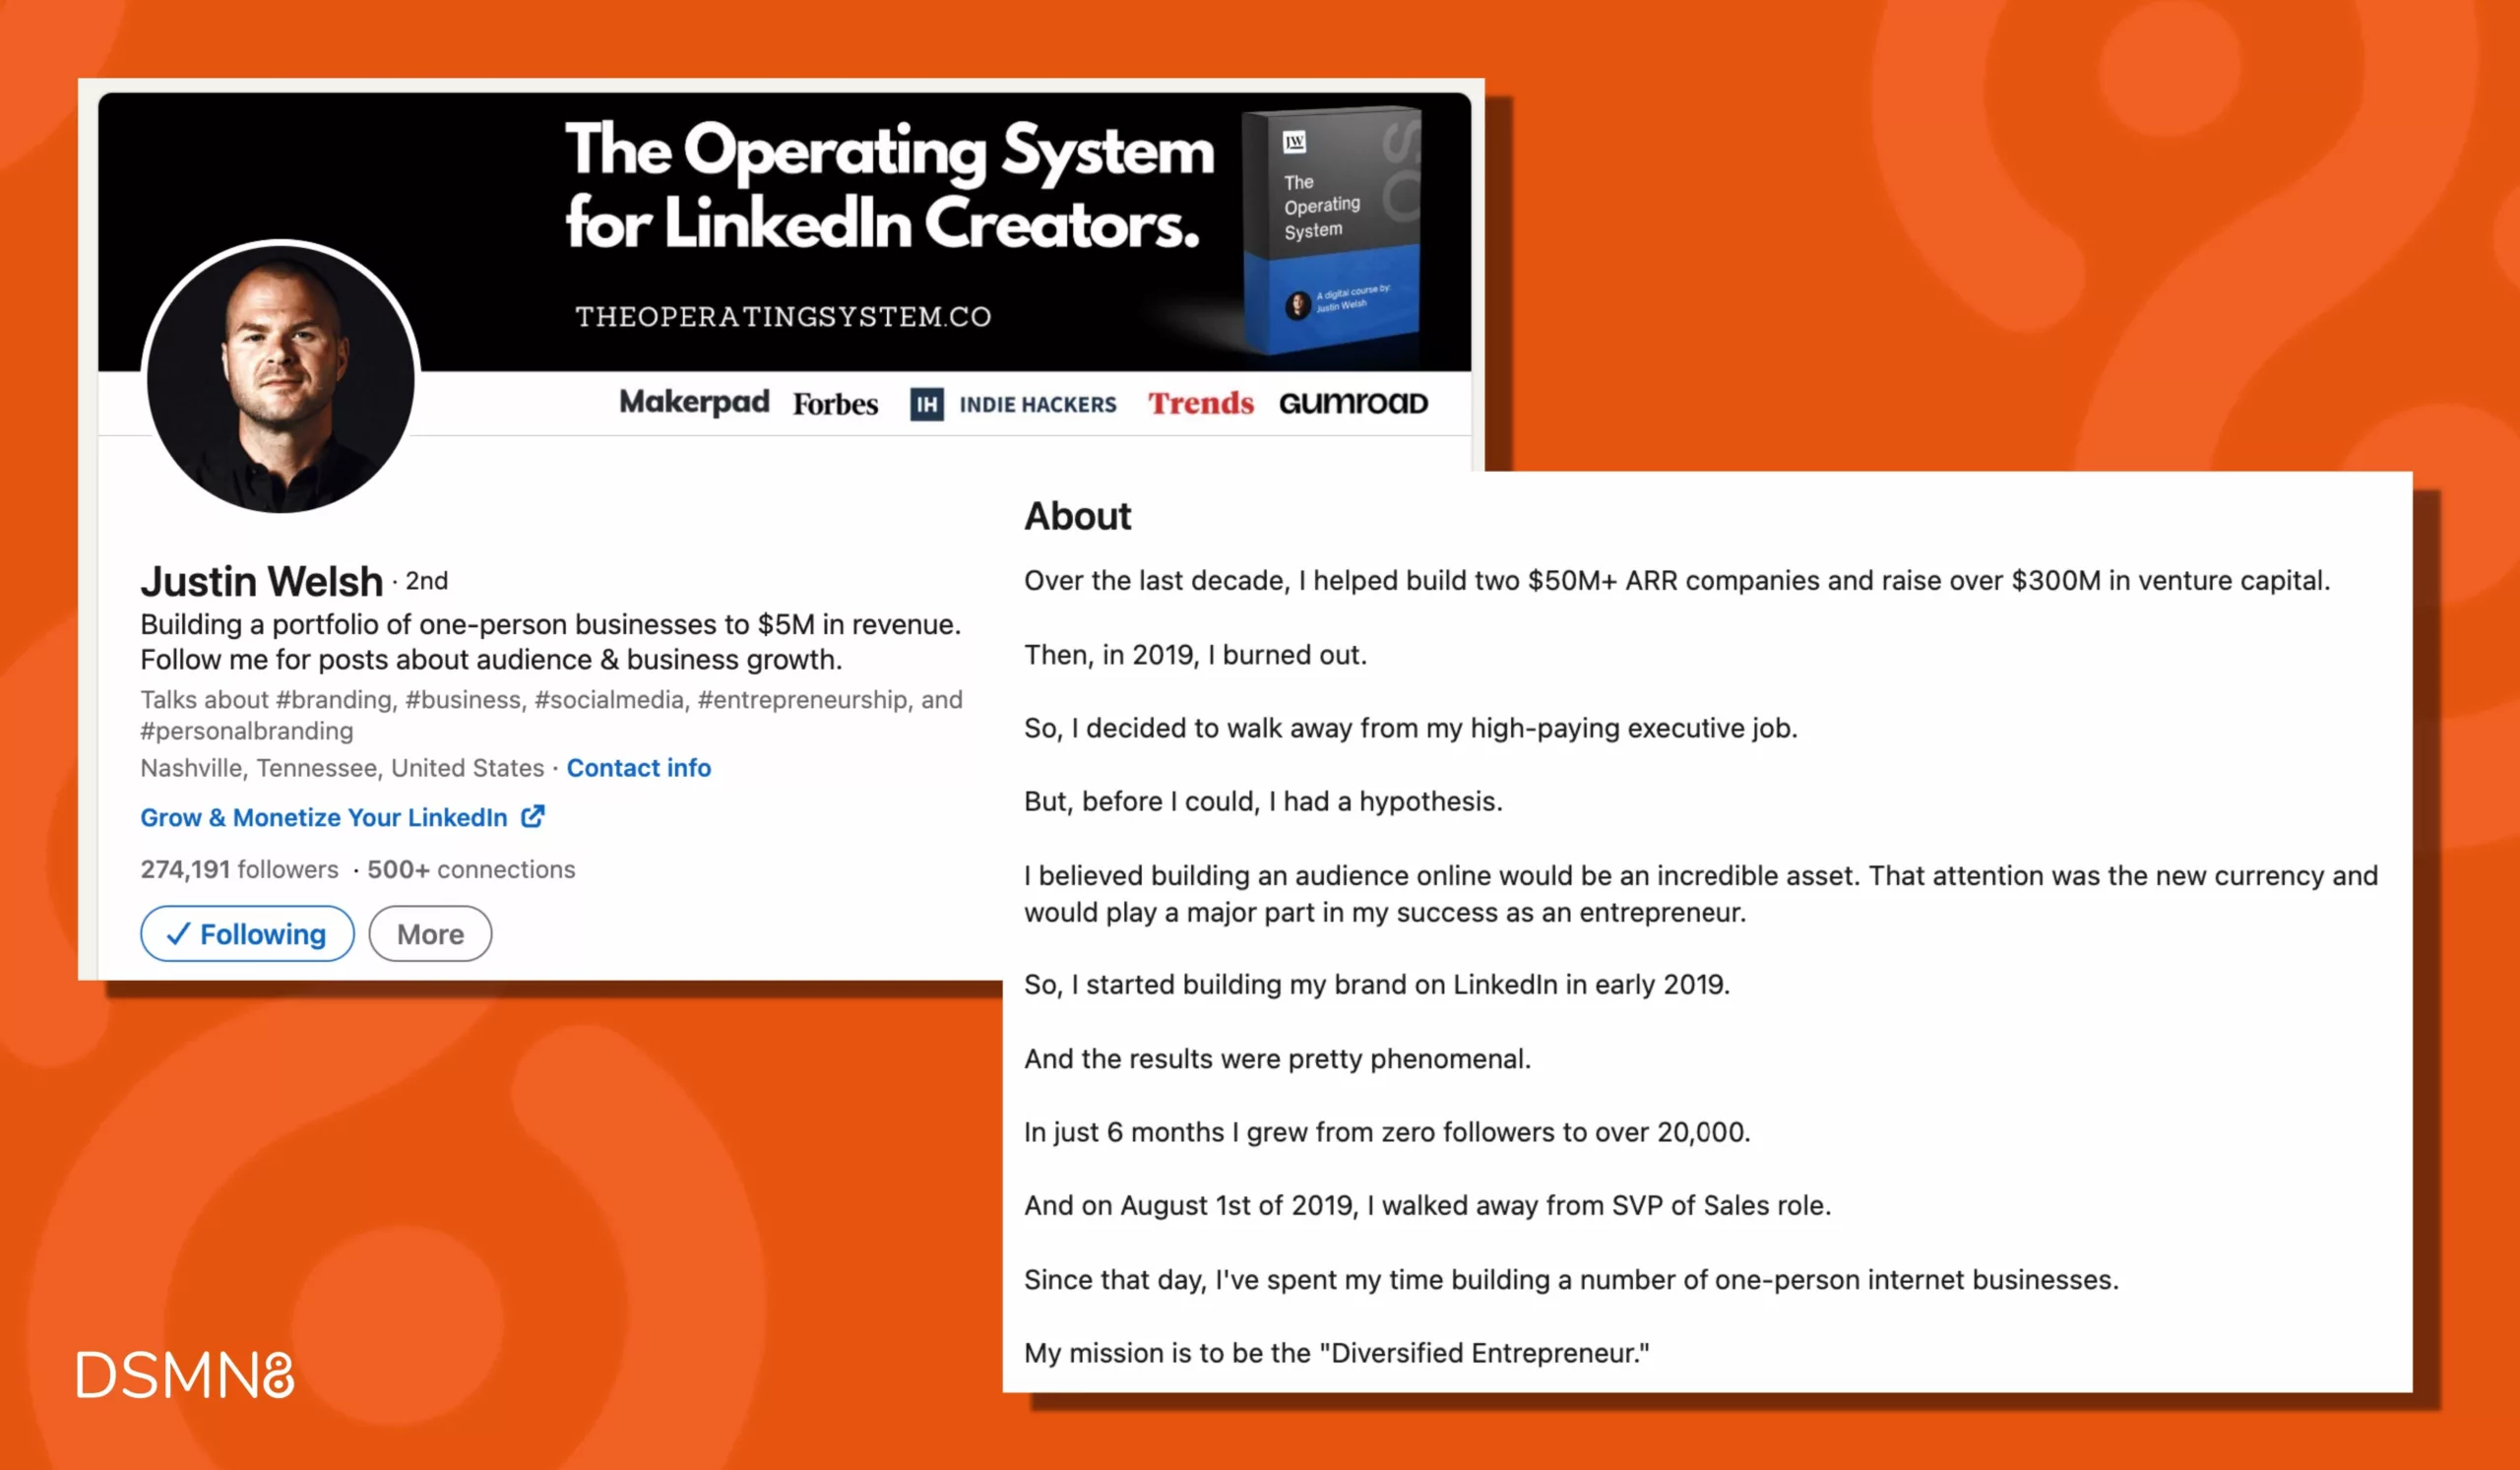 LinkedIn - How To Login & Optimize Your Profile for Results